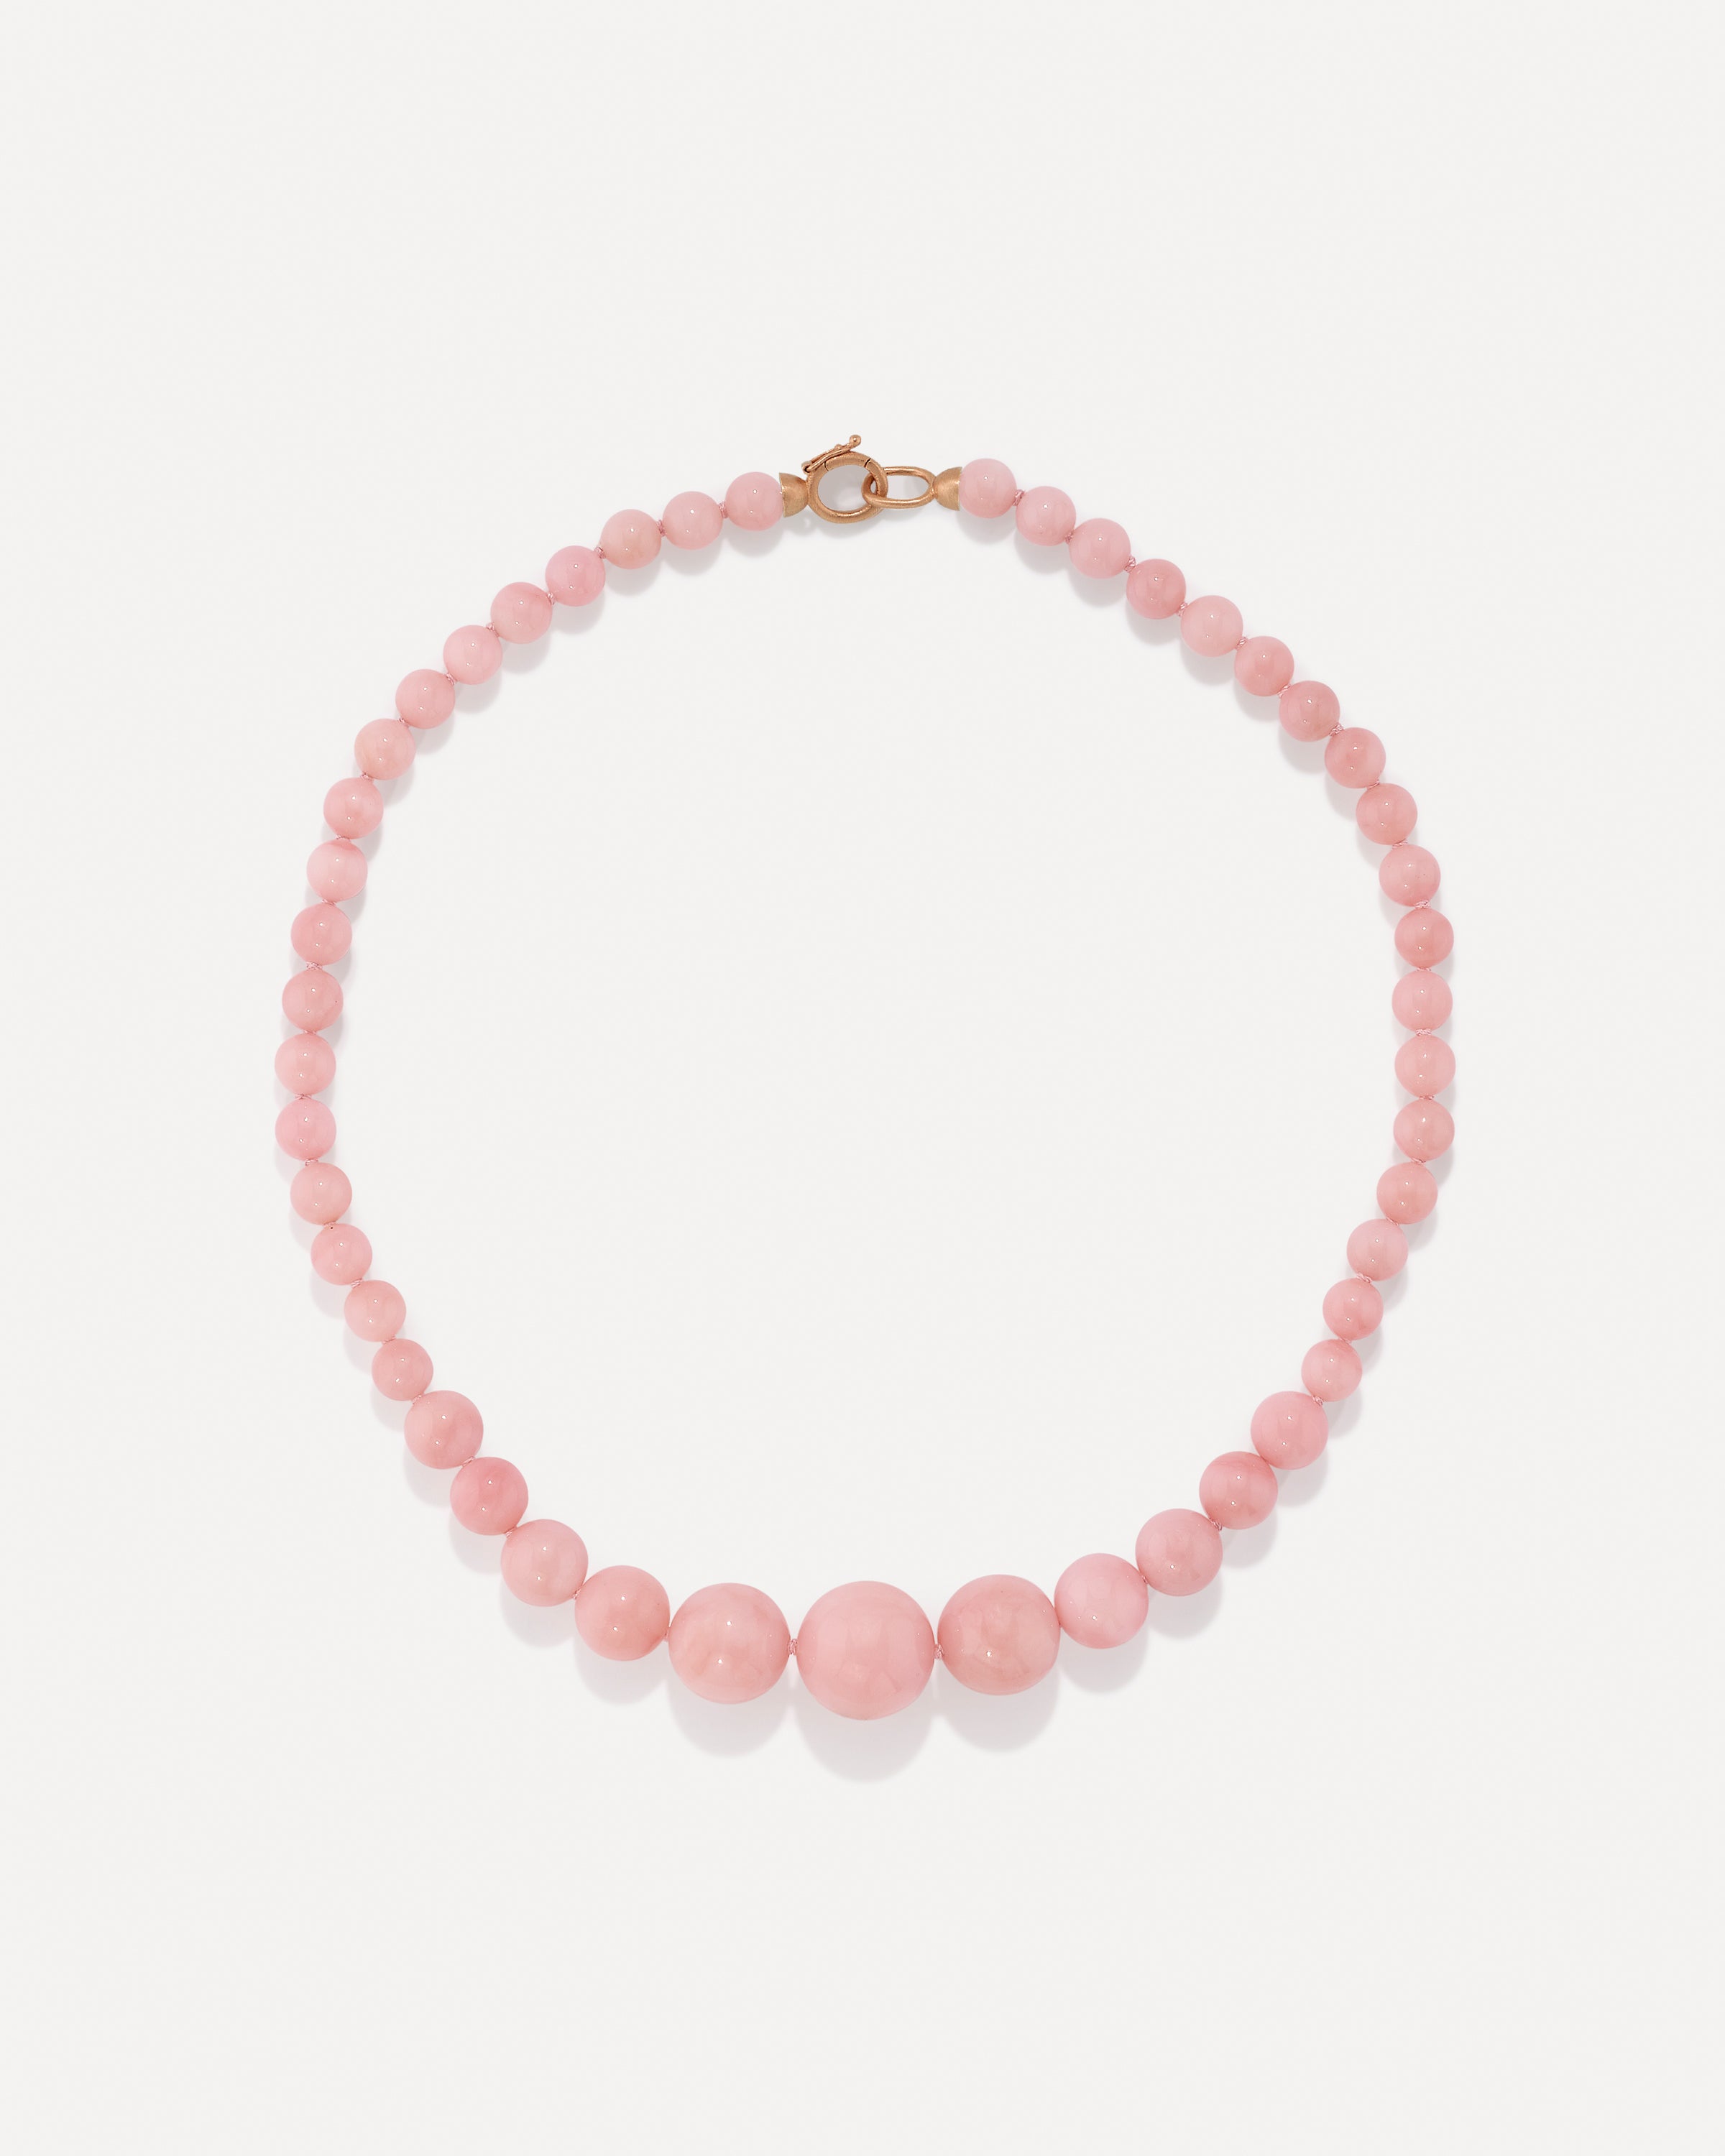 Graduated Gumball Candy Necklace – Irene Neuwirth